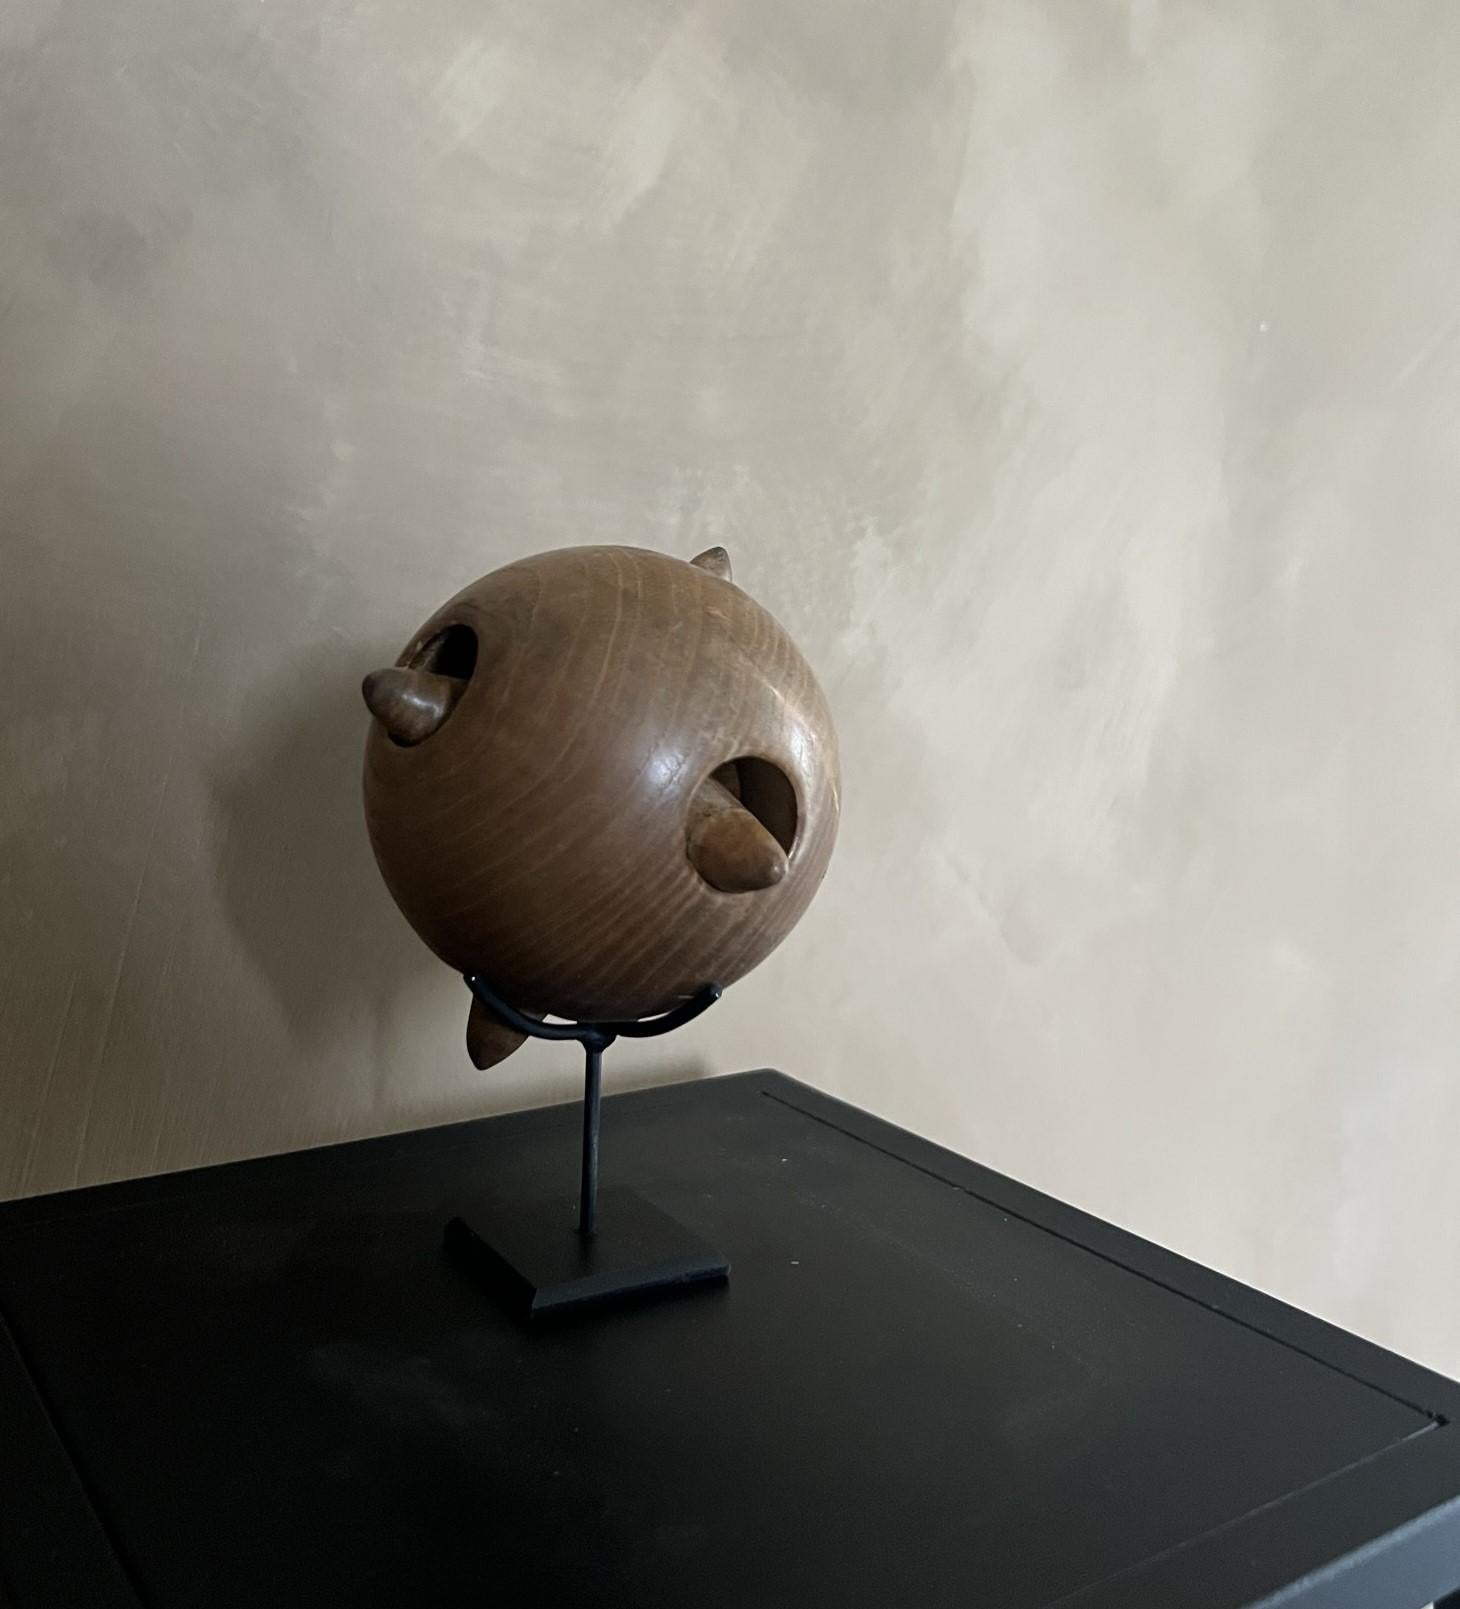 Early 20th Century, Open Turned Wooden Sphere Canton Ball For Sale 2